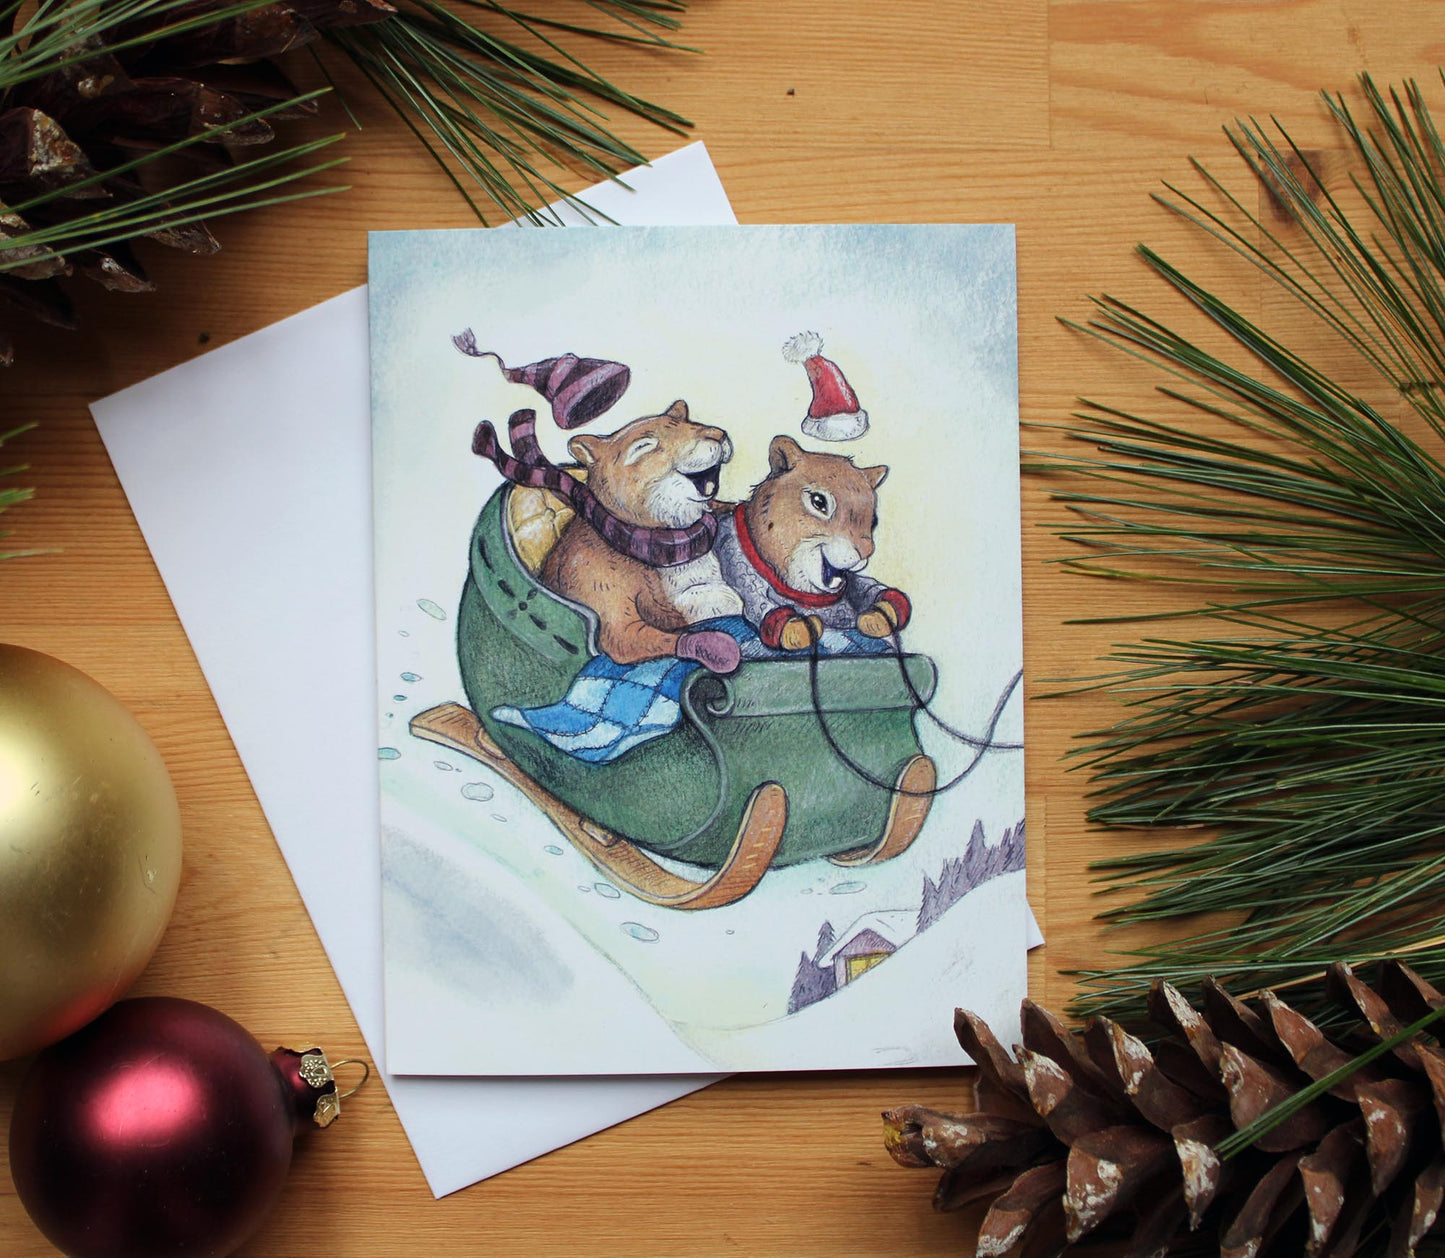 Illustrated chritmas card of two little red squirrels laughing in a sleigh.